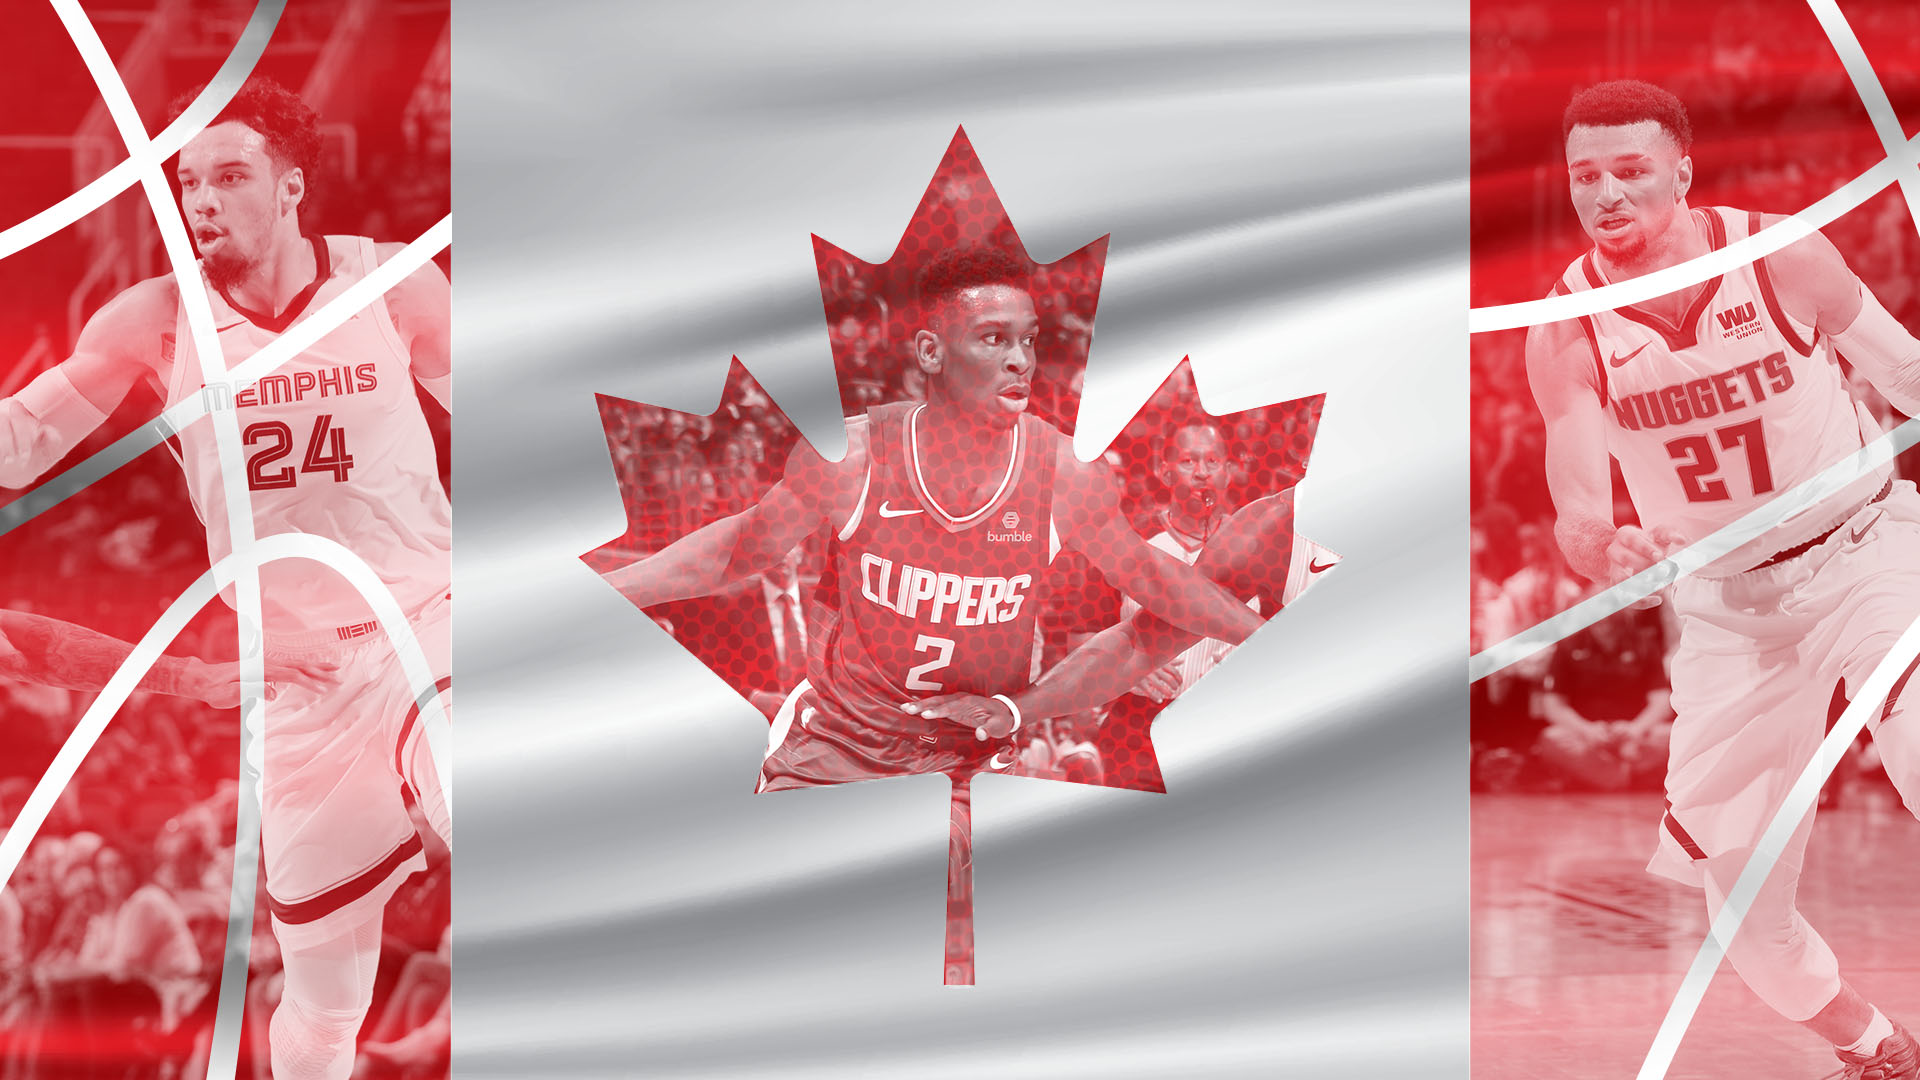 Heat Check: Who should start for team Canada at the FIBA Basketball World Cup 2019 in ...